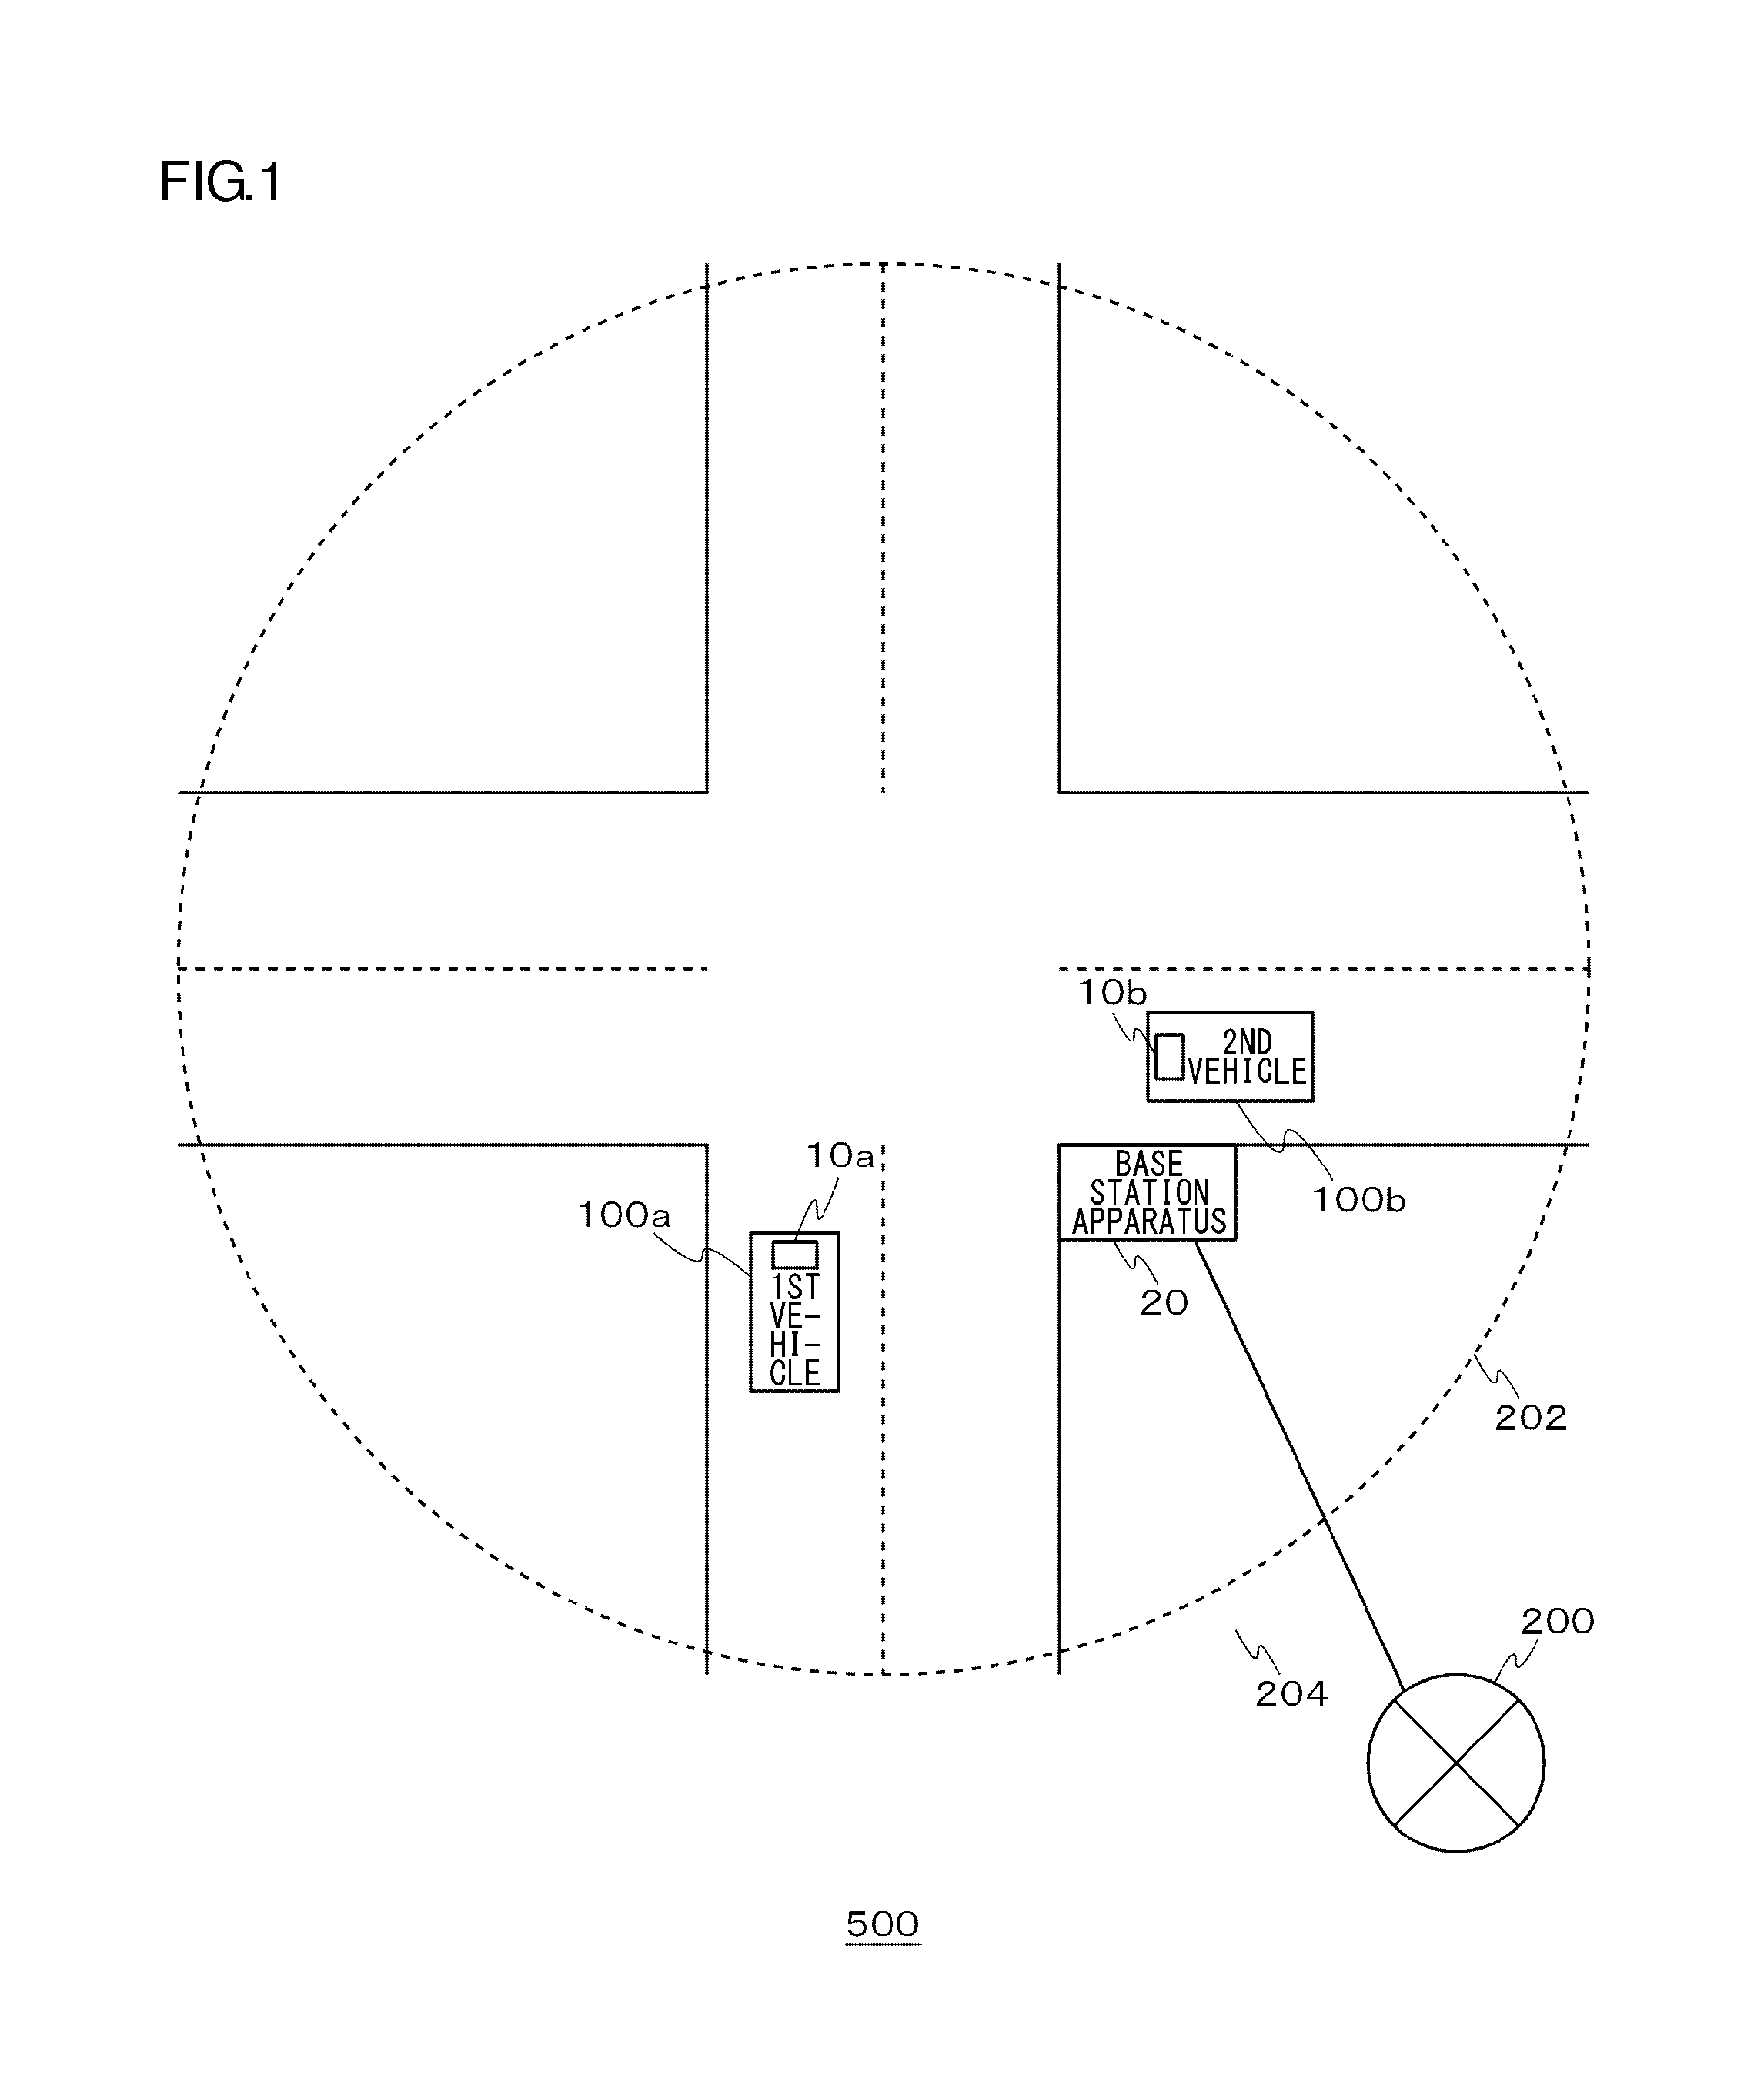 Communication apparatus for transmitting or receiving a signal including predetermind information